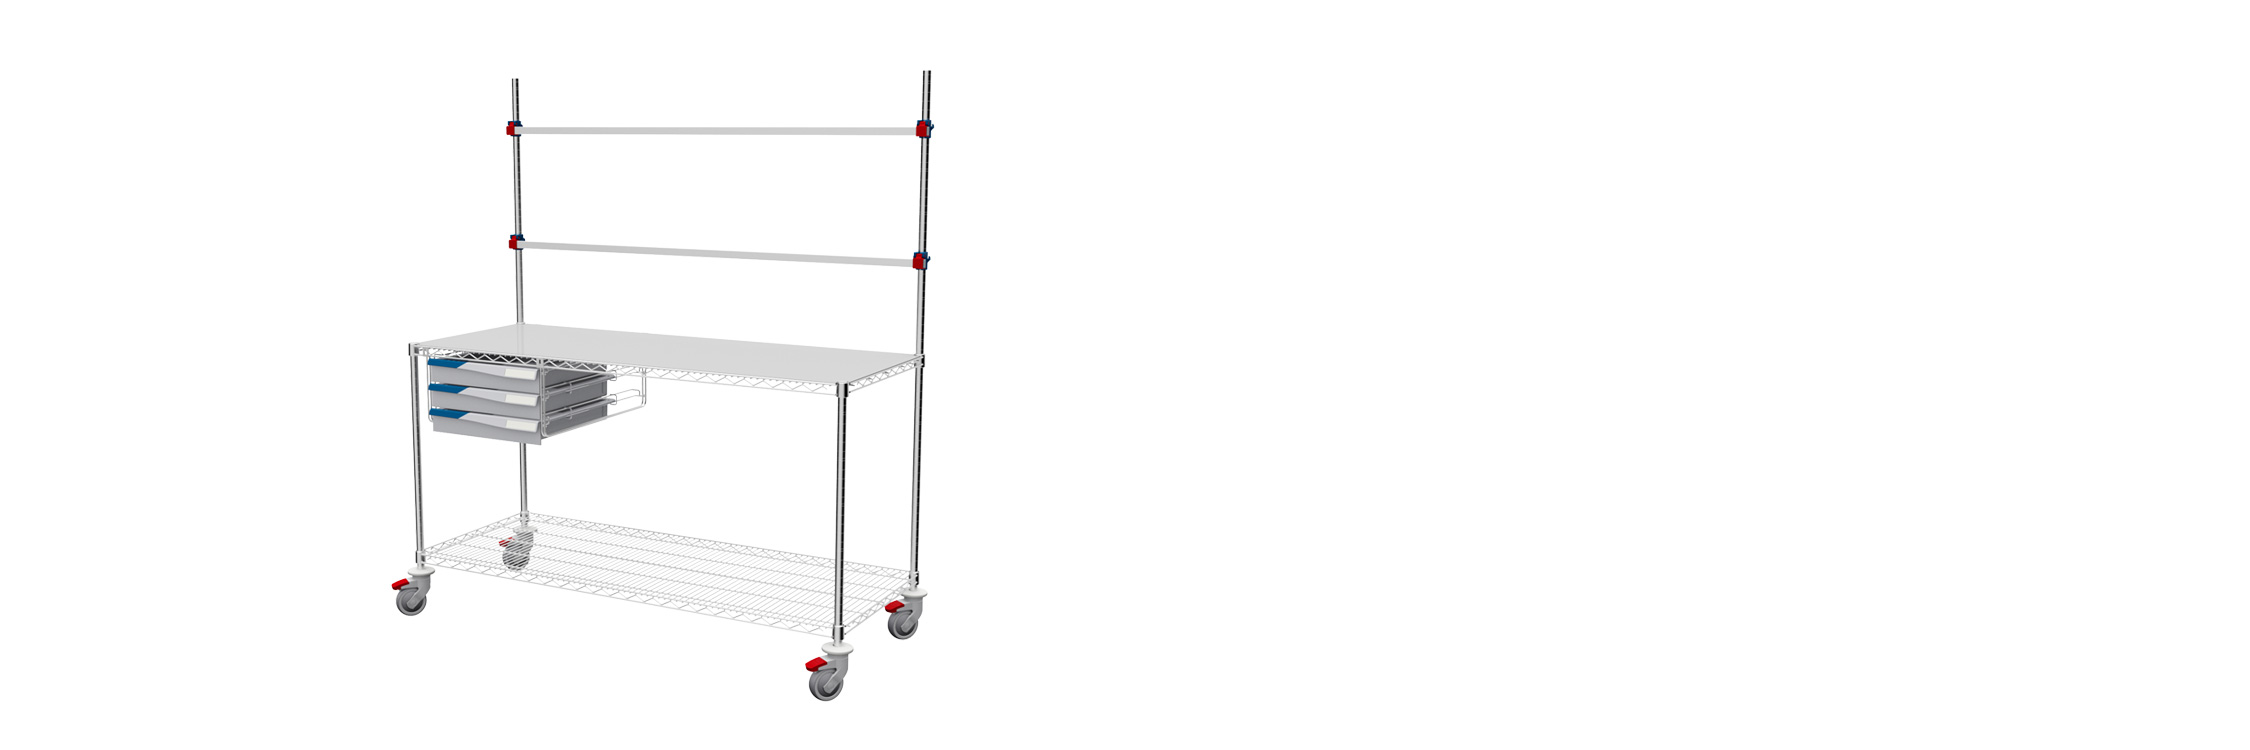 MOSYS TP procedure table on wheels, with drawers and overbridge